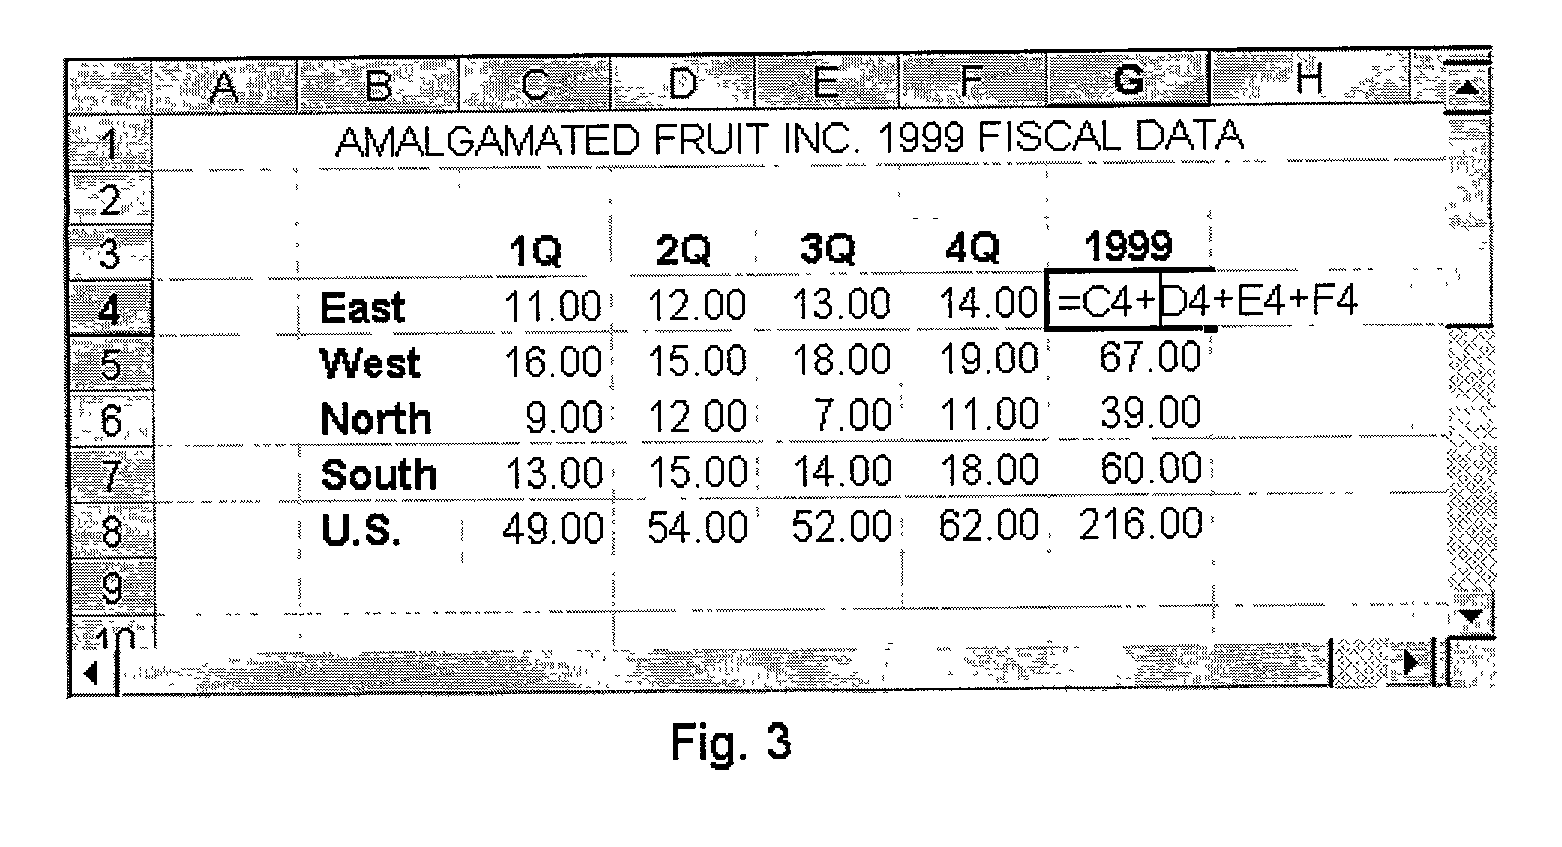 System and method for calculation using multi-field columns with modifiable field order